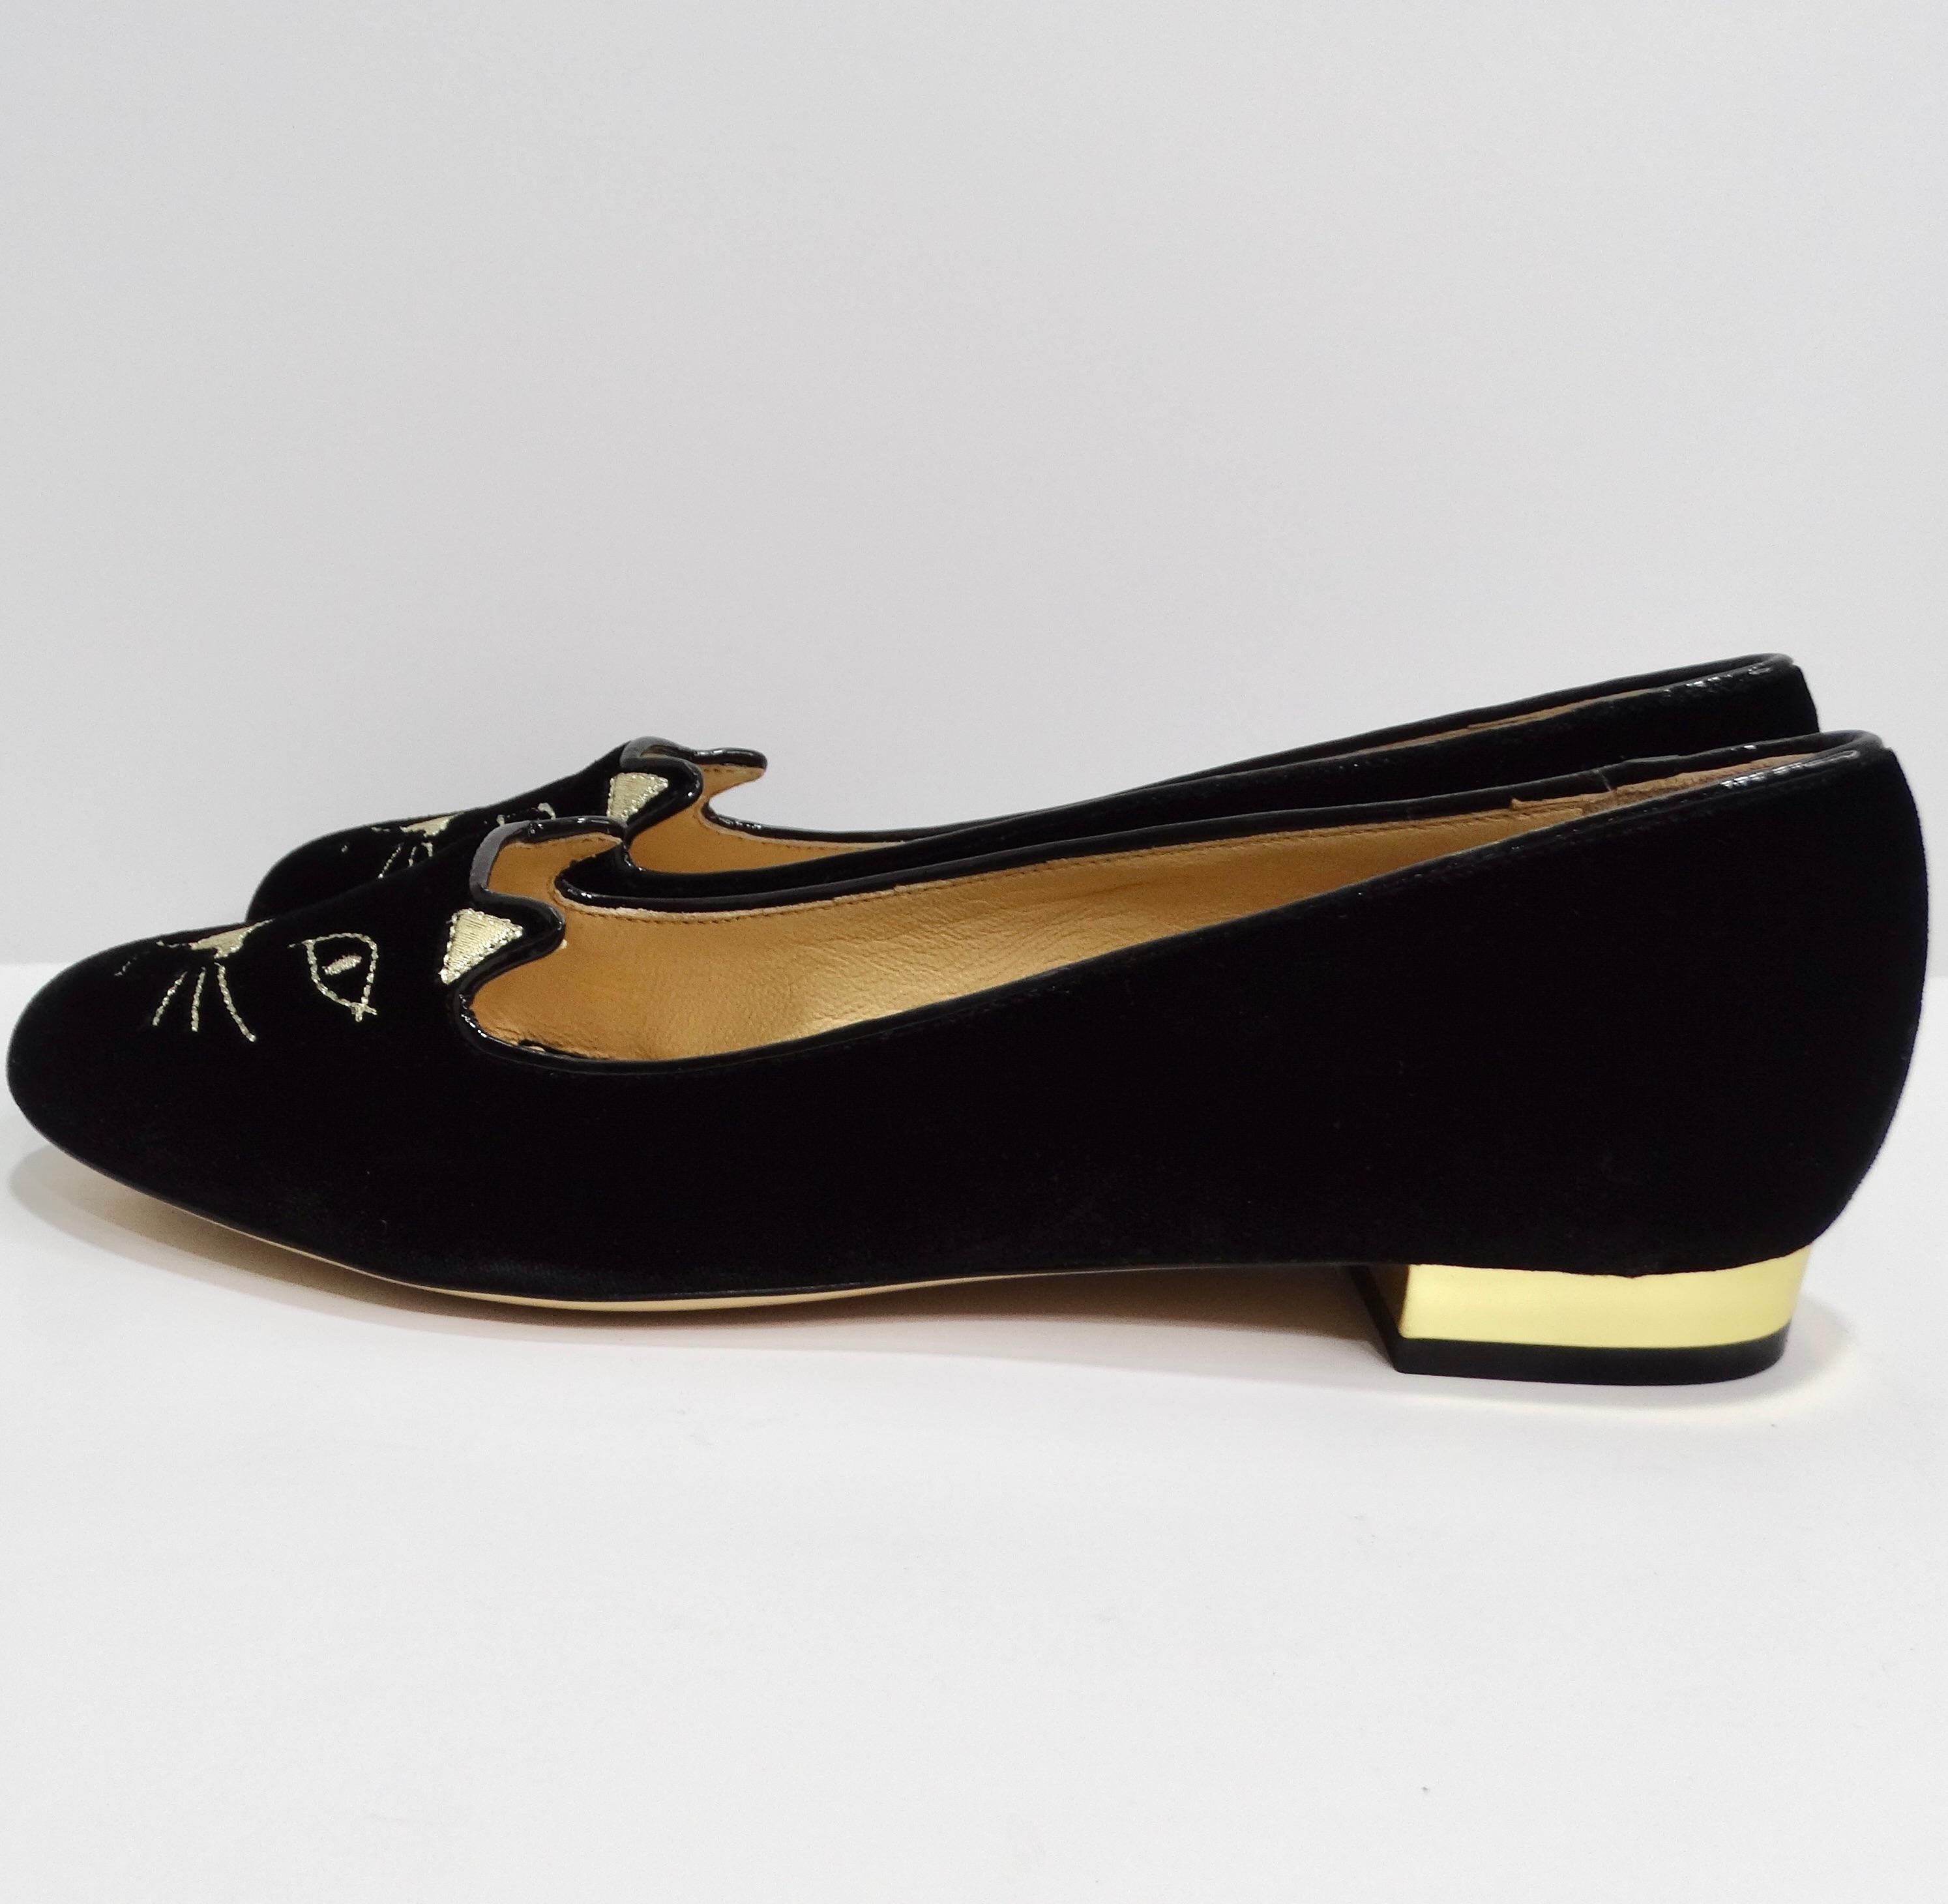 Charlotte Olympia - Chausssures brodées signées Kitty en vente 4